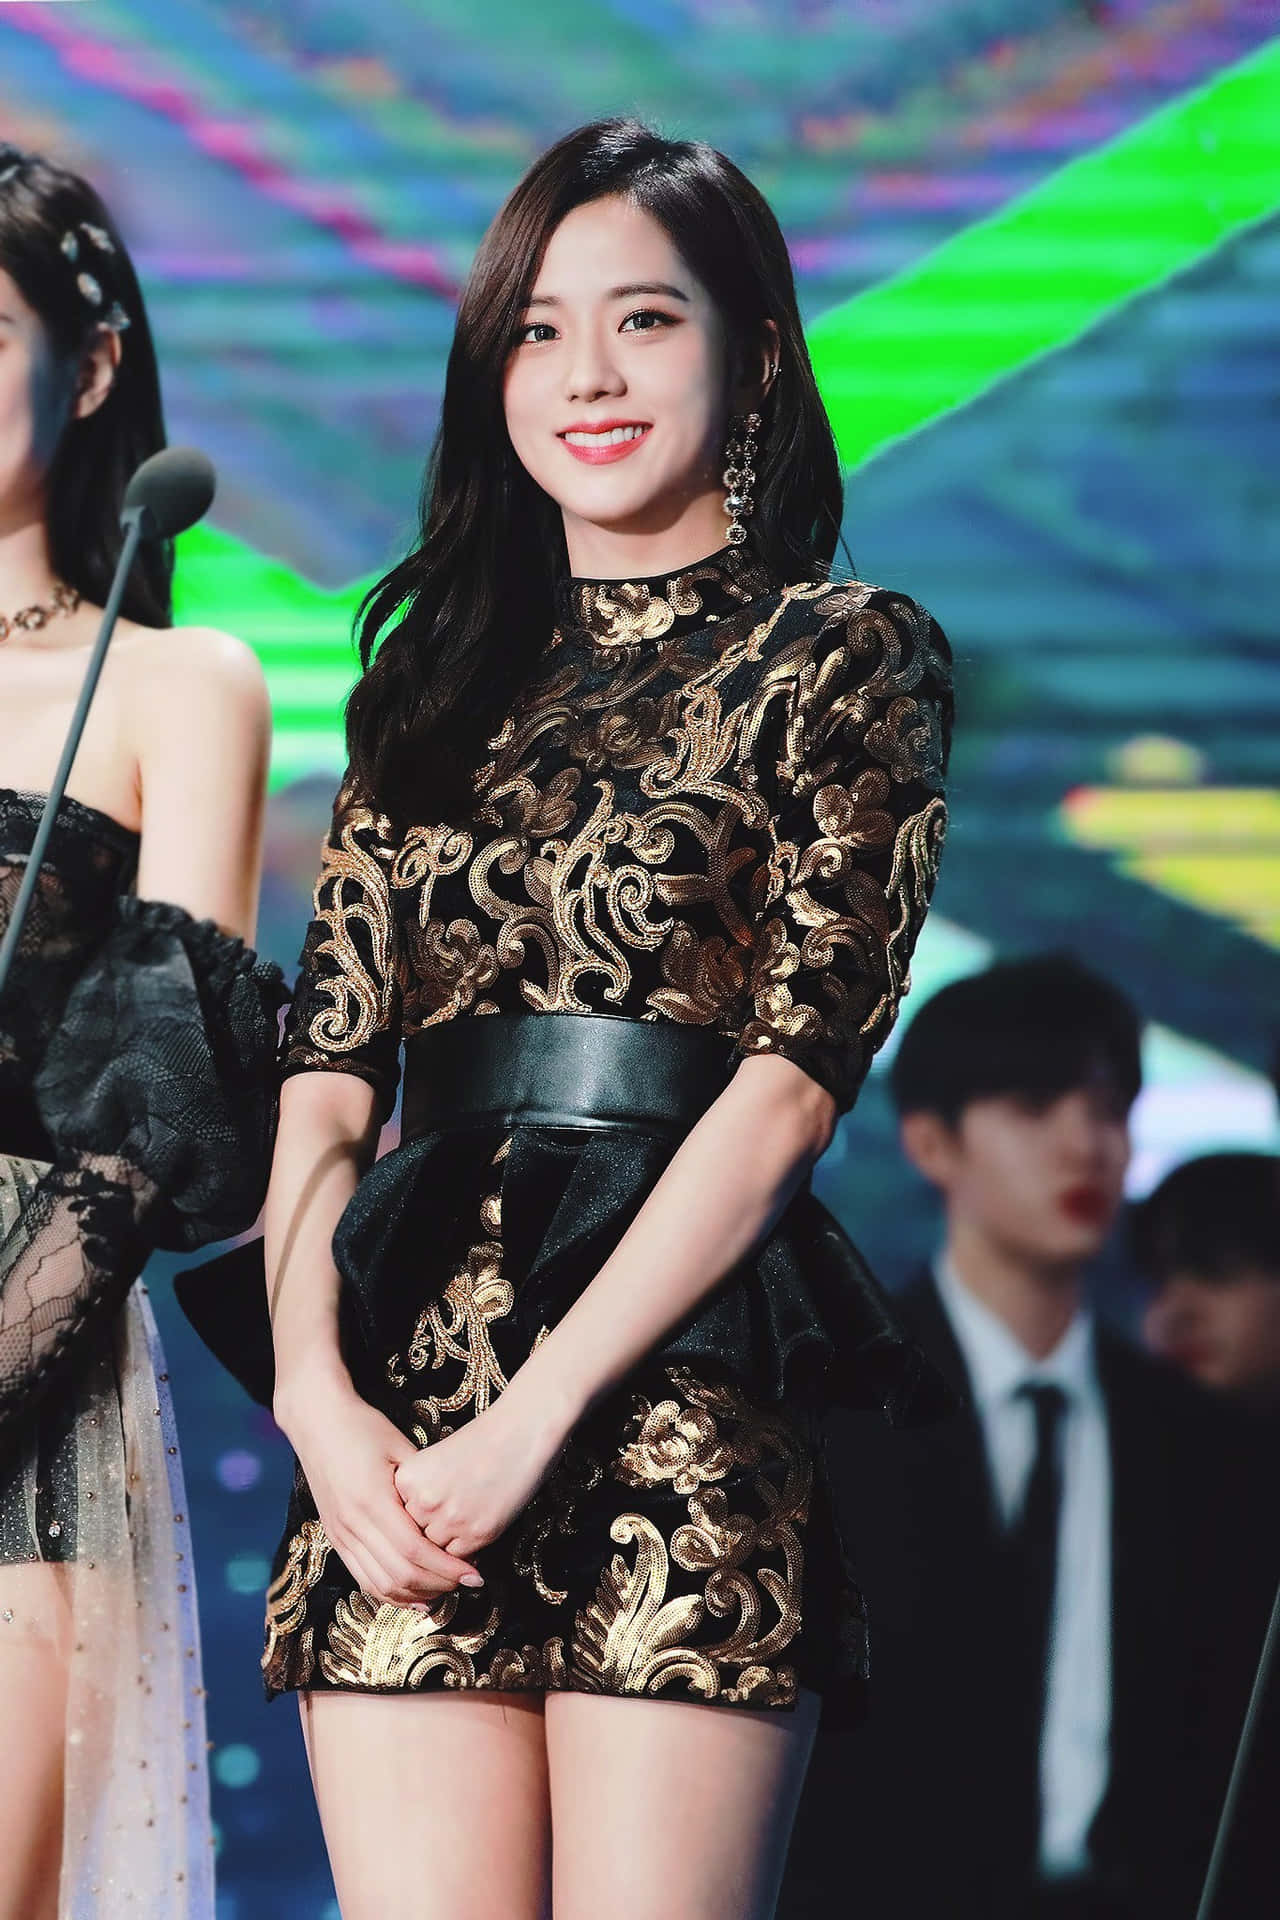 "Showcasing her beauty and living her dreams, K-pop diva Jisoo strikes a pose in this stunning photo."